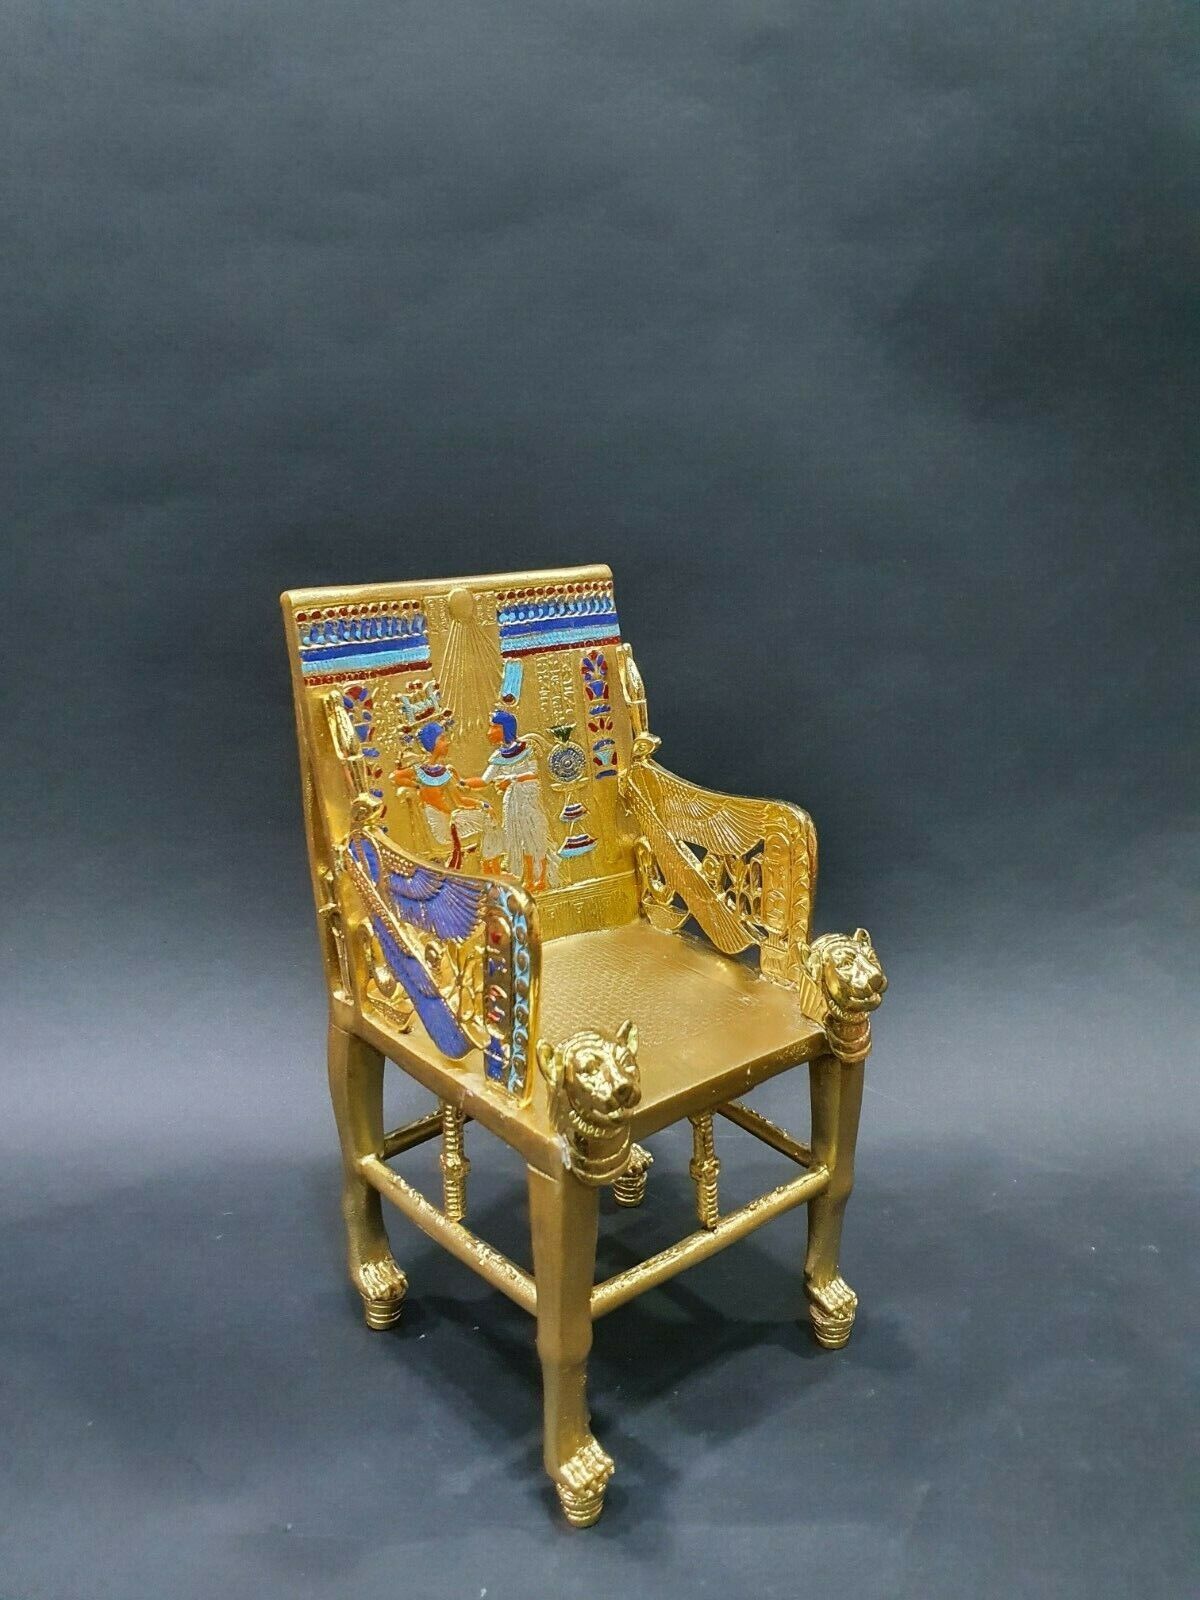 Gorgeous king Tutankhamun Throne Handmade from the copper with the Gold painting